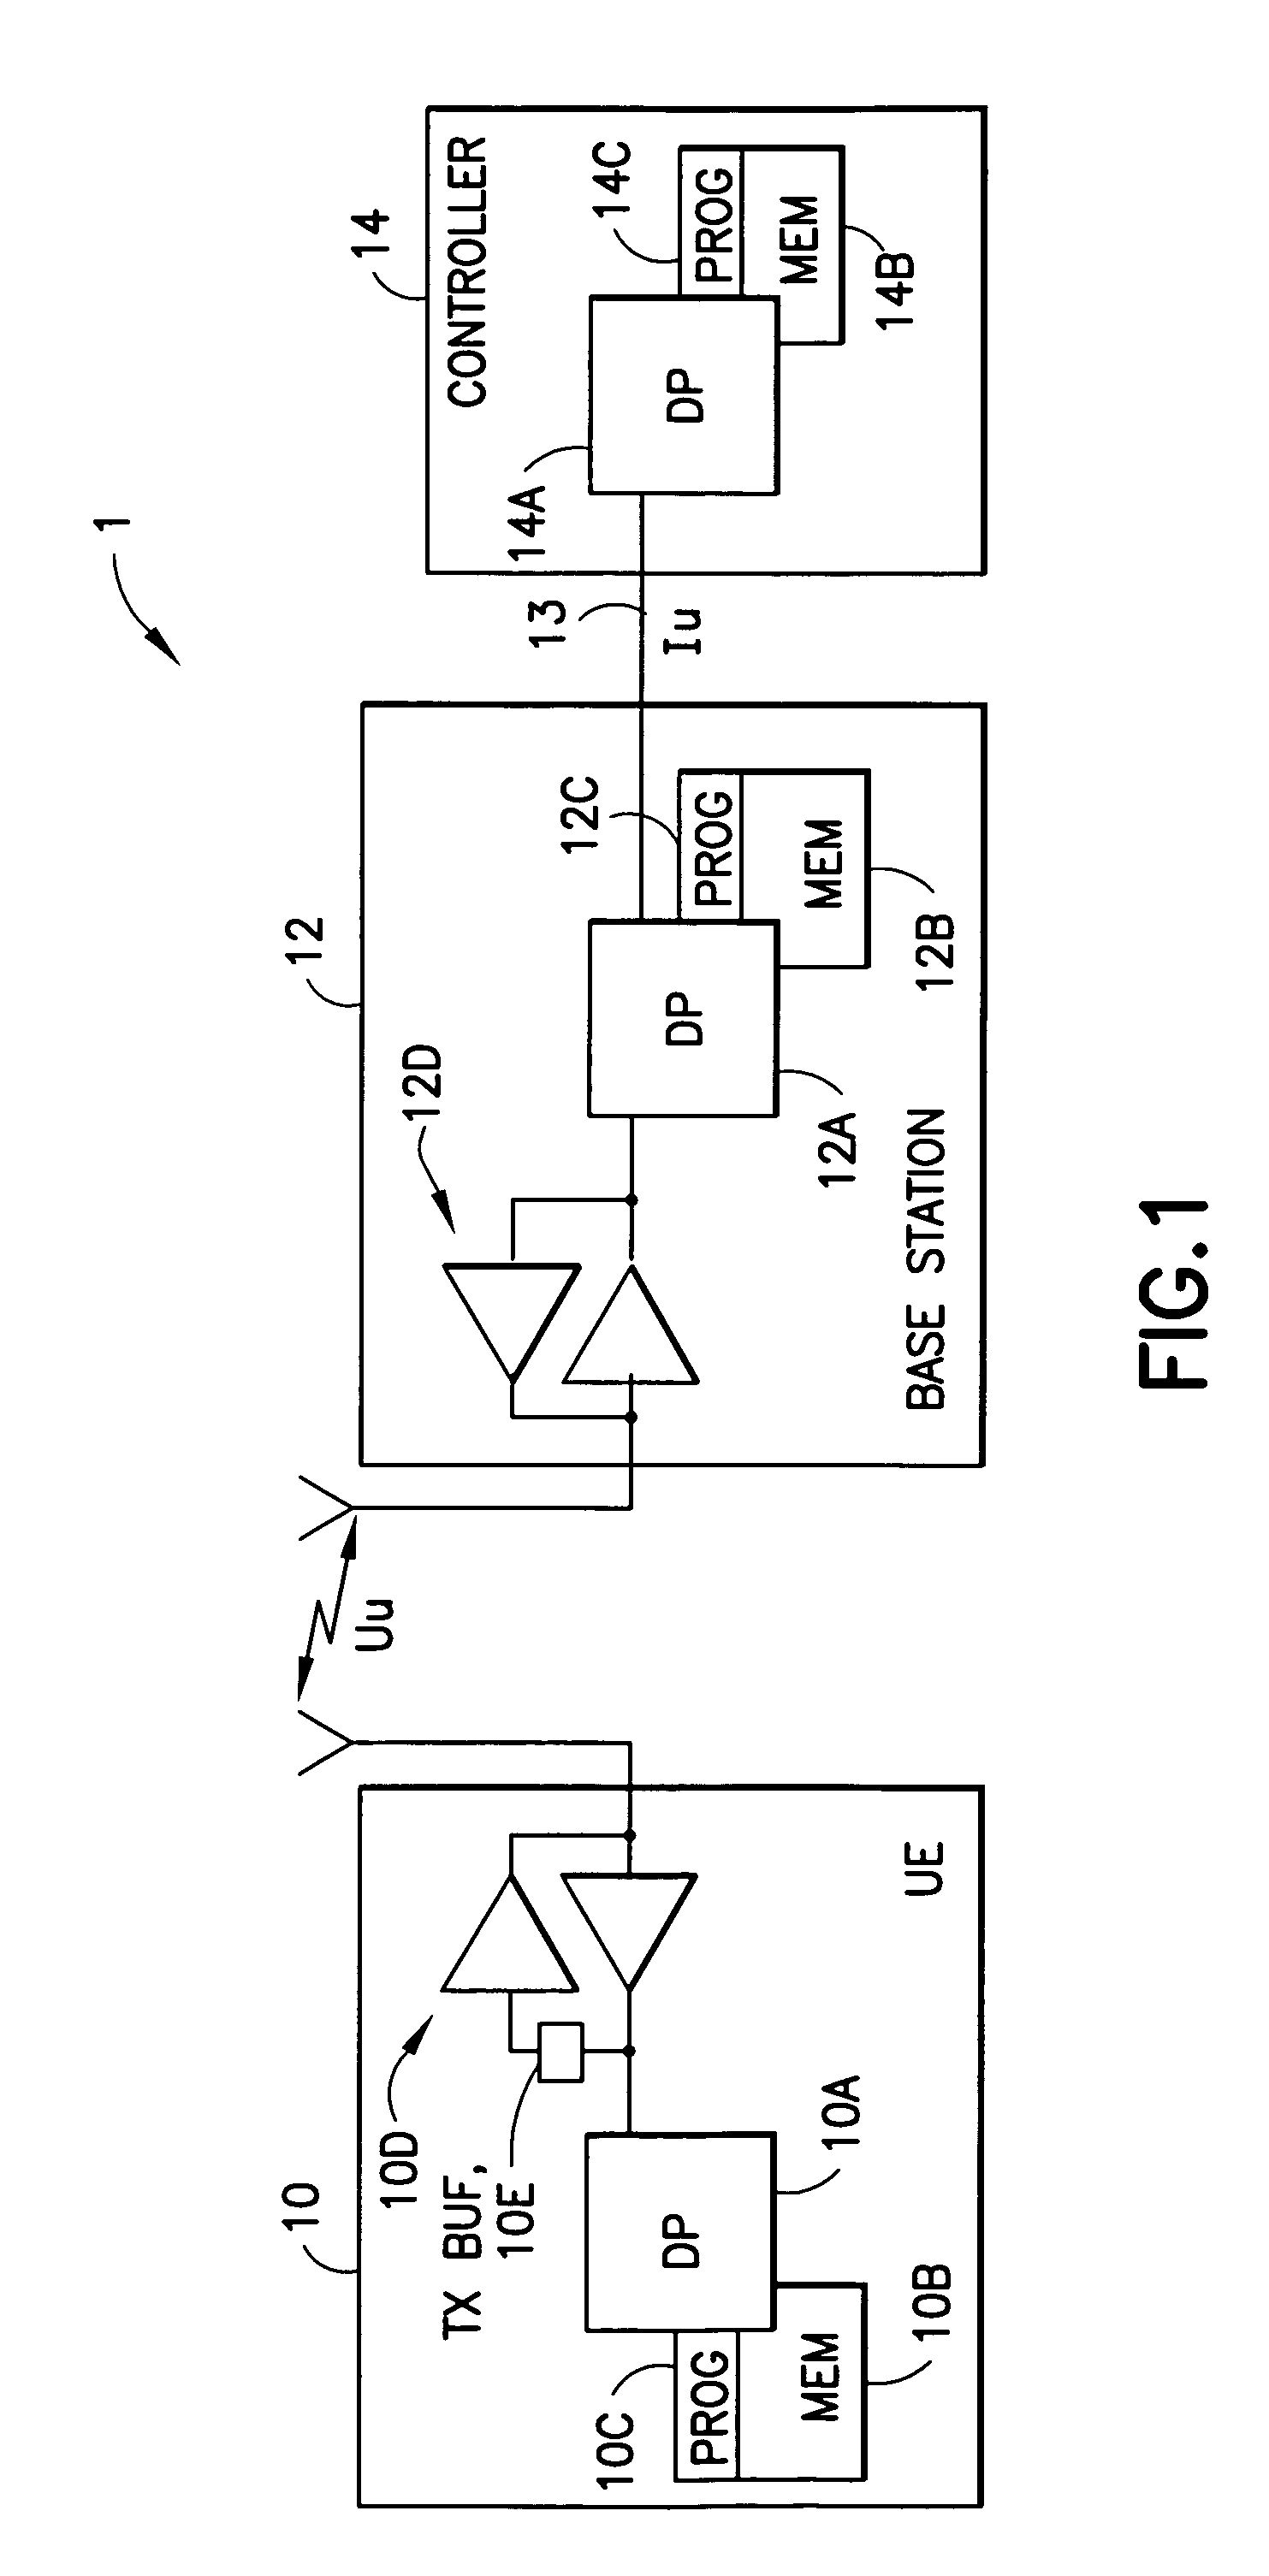 Apparatus, method and computer program product to request a data rate increase based on ability to transmit at least one more selected data unit